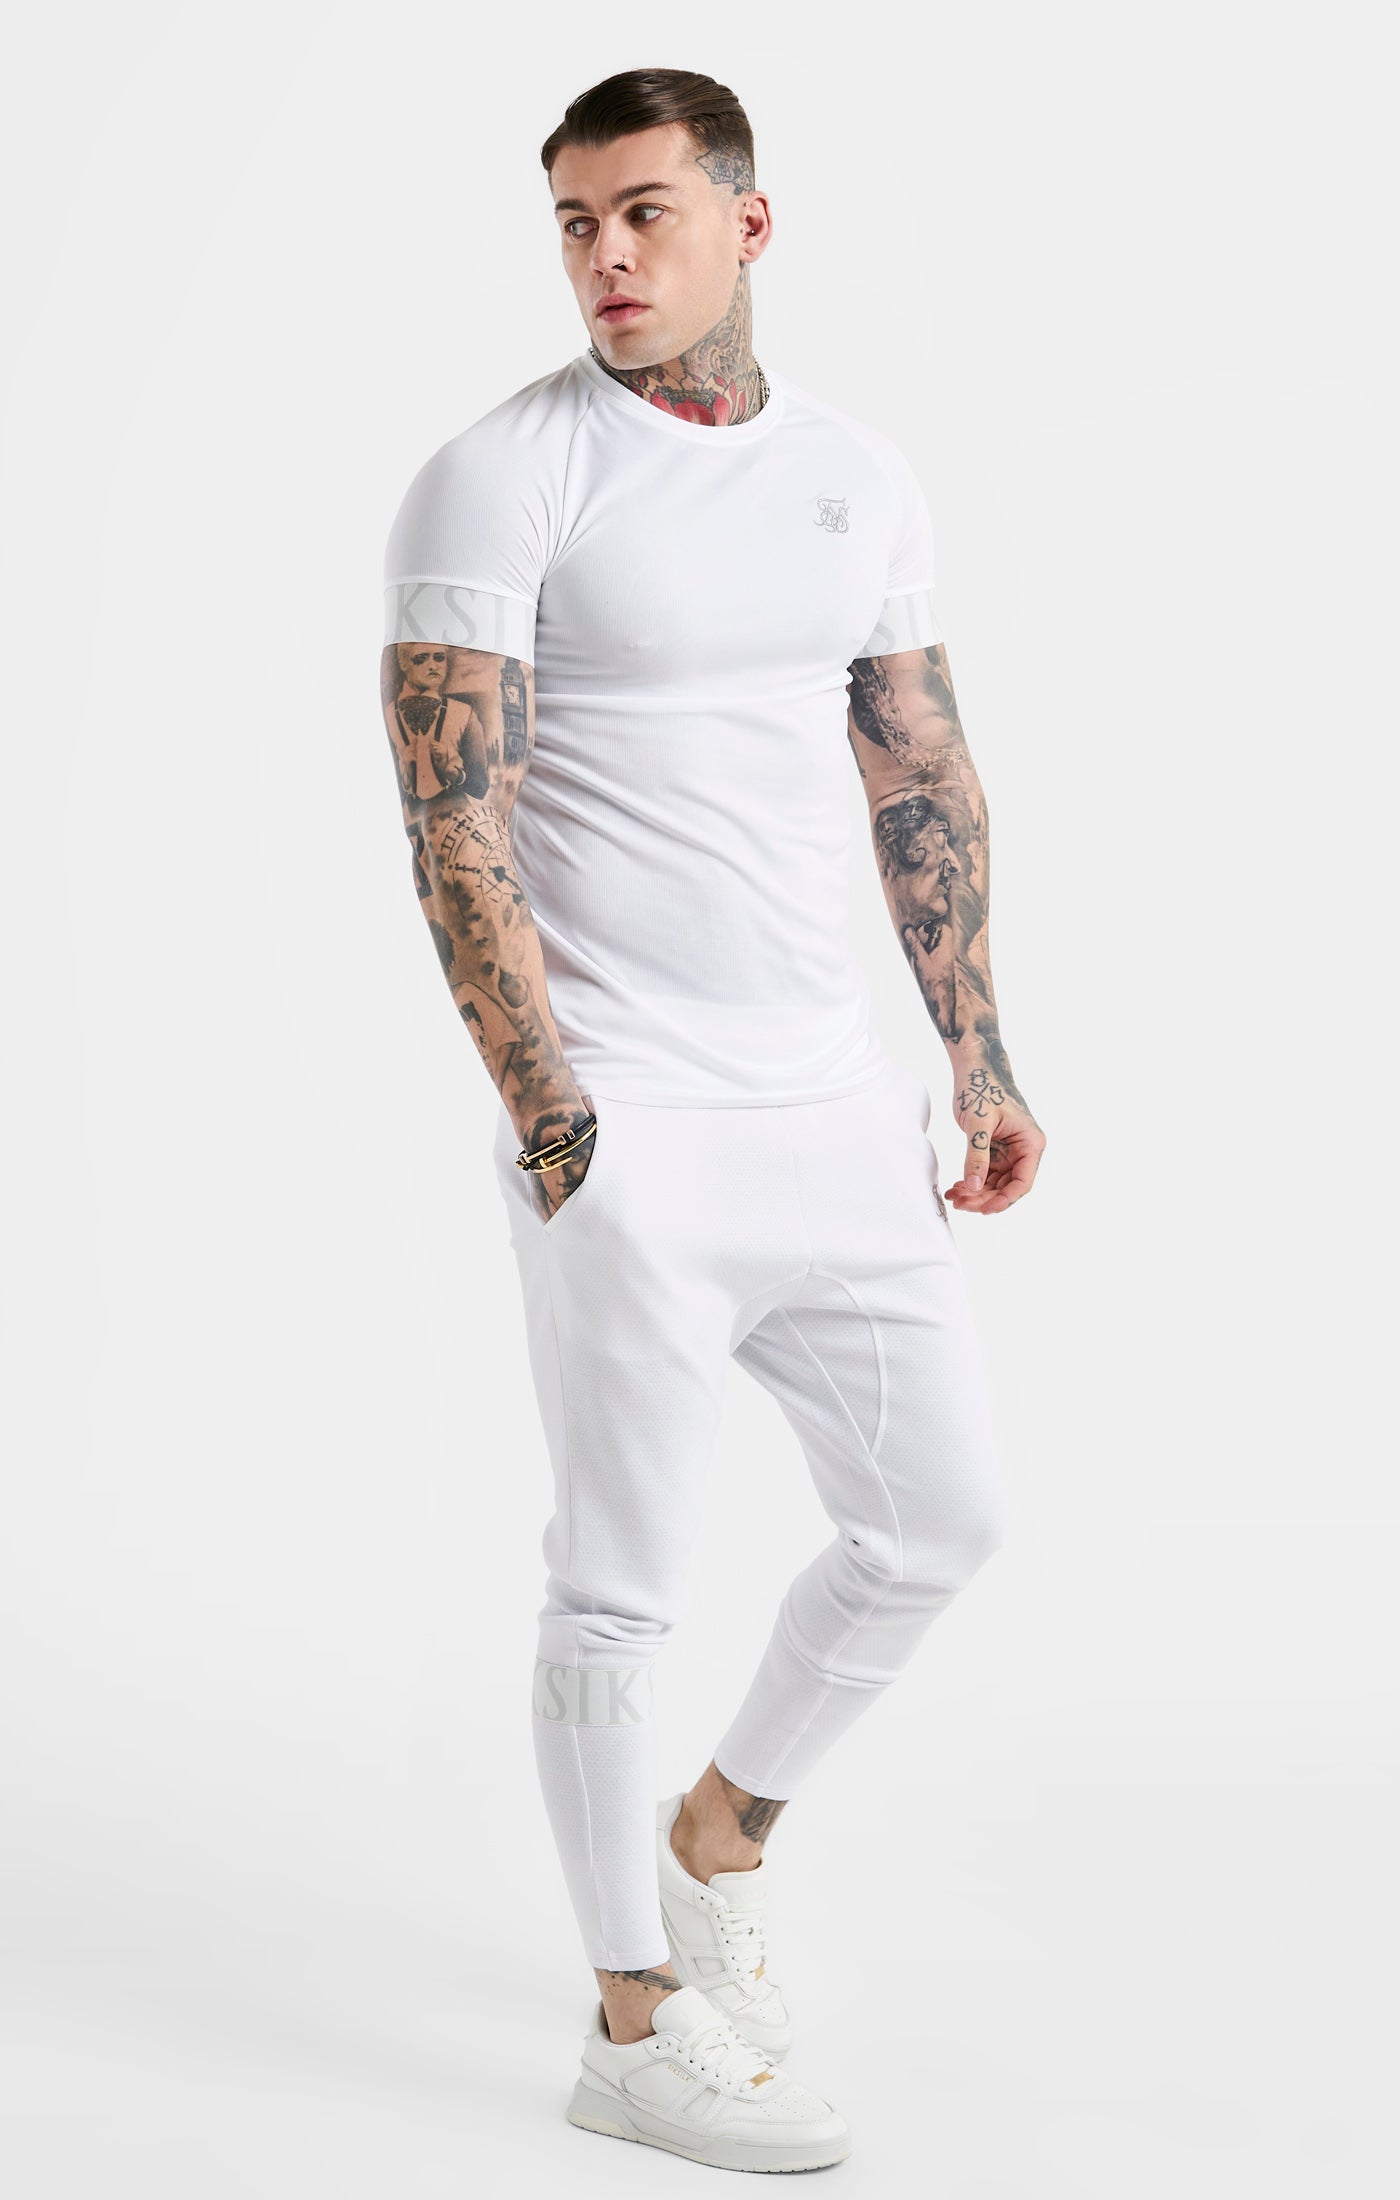 Load image into Gallery viewer, SikSilk Dynamic Tech T-Shirt - White (2)